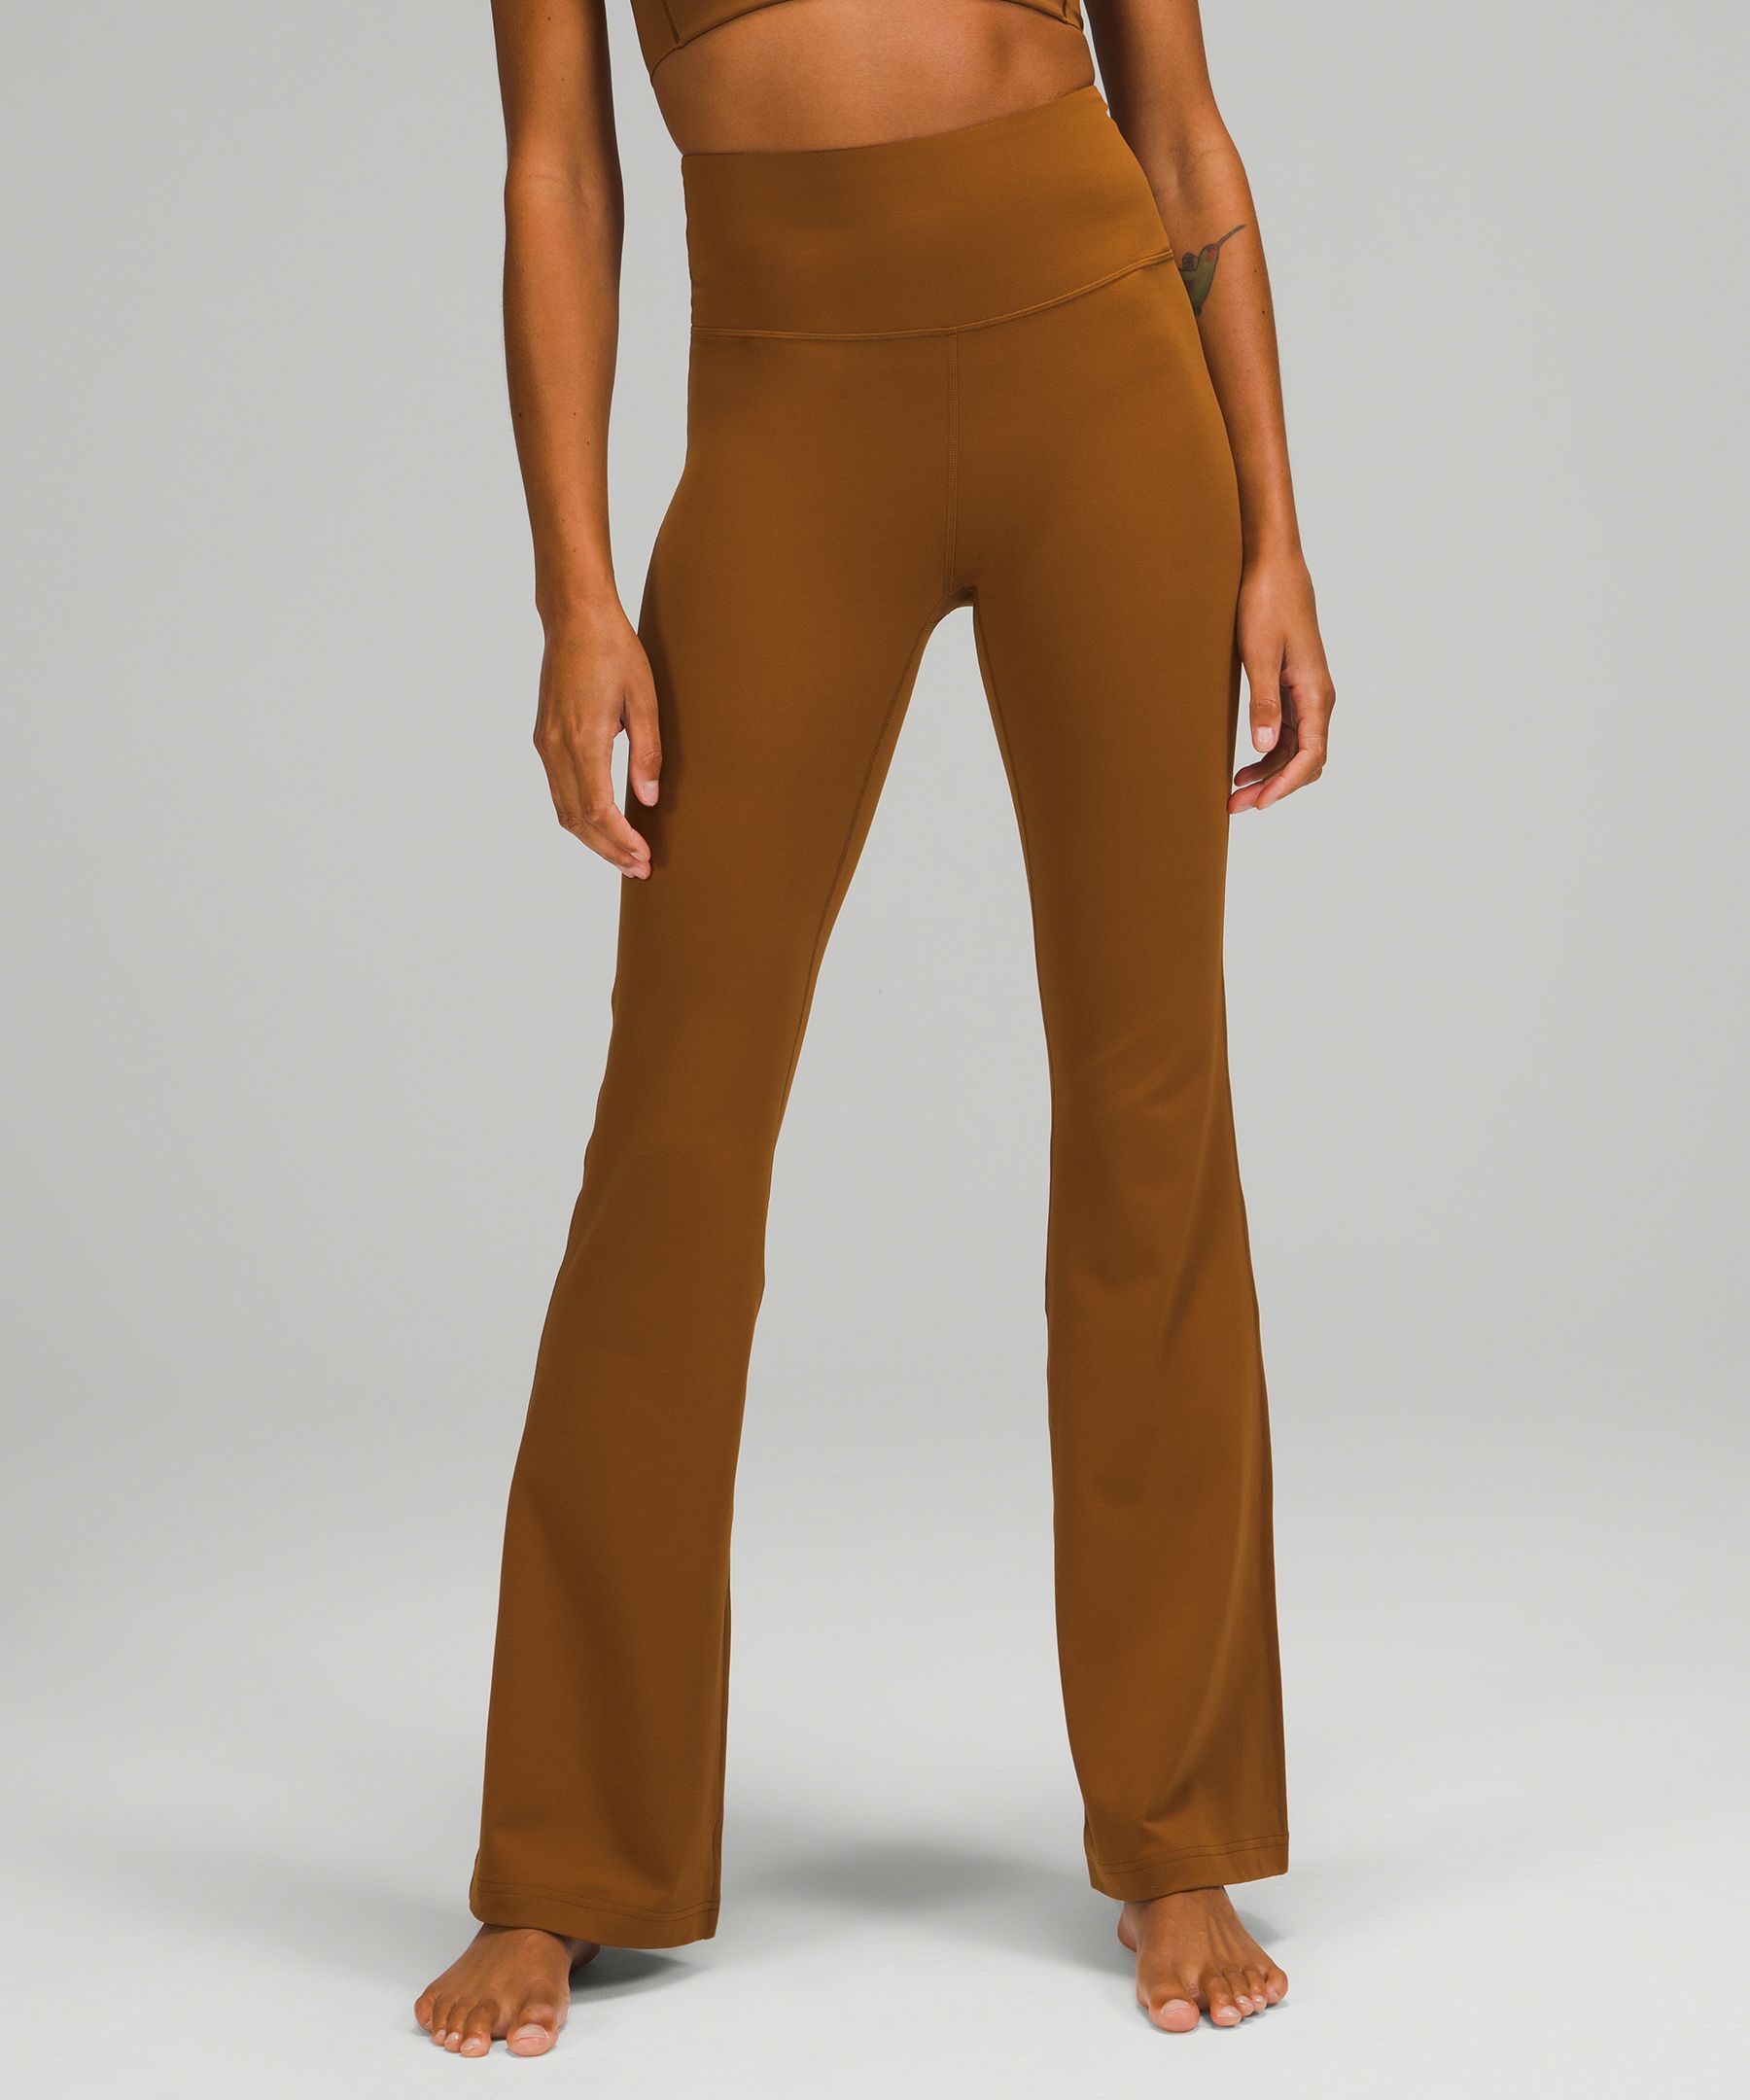 Lululemon Groove Pants Flare Super High-rise Nulu In Copper Brown